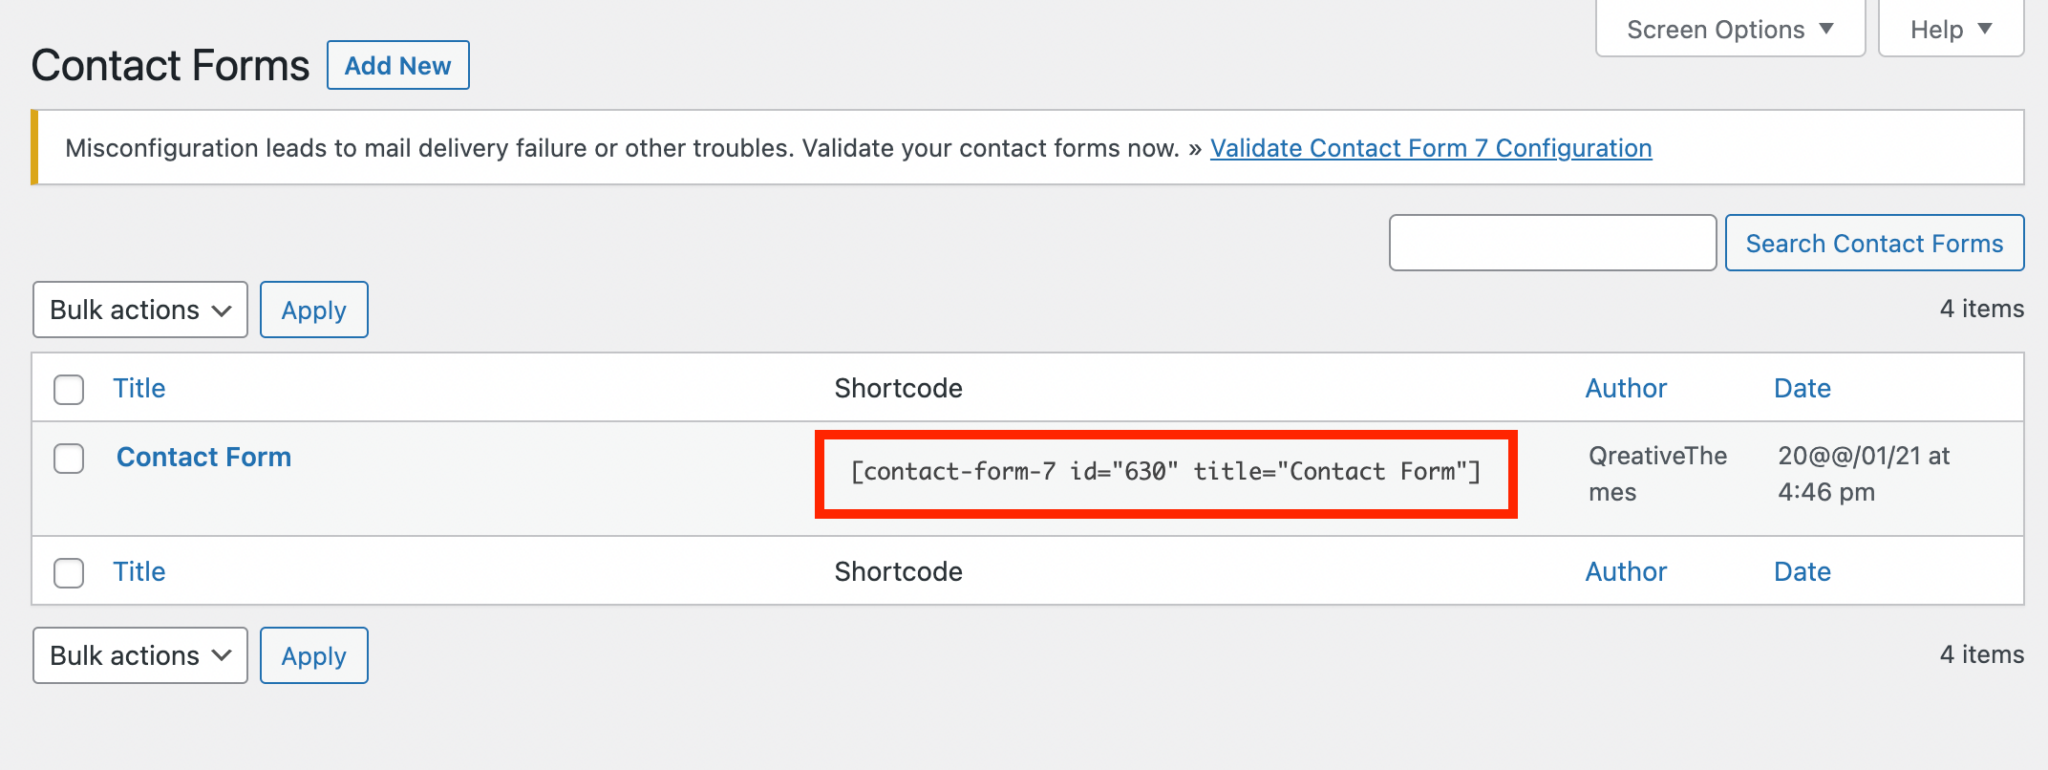 contact-form-shortcode-2048x770.png